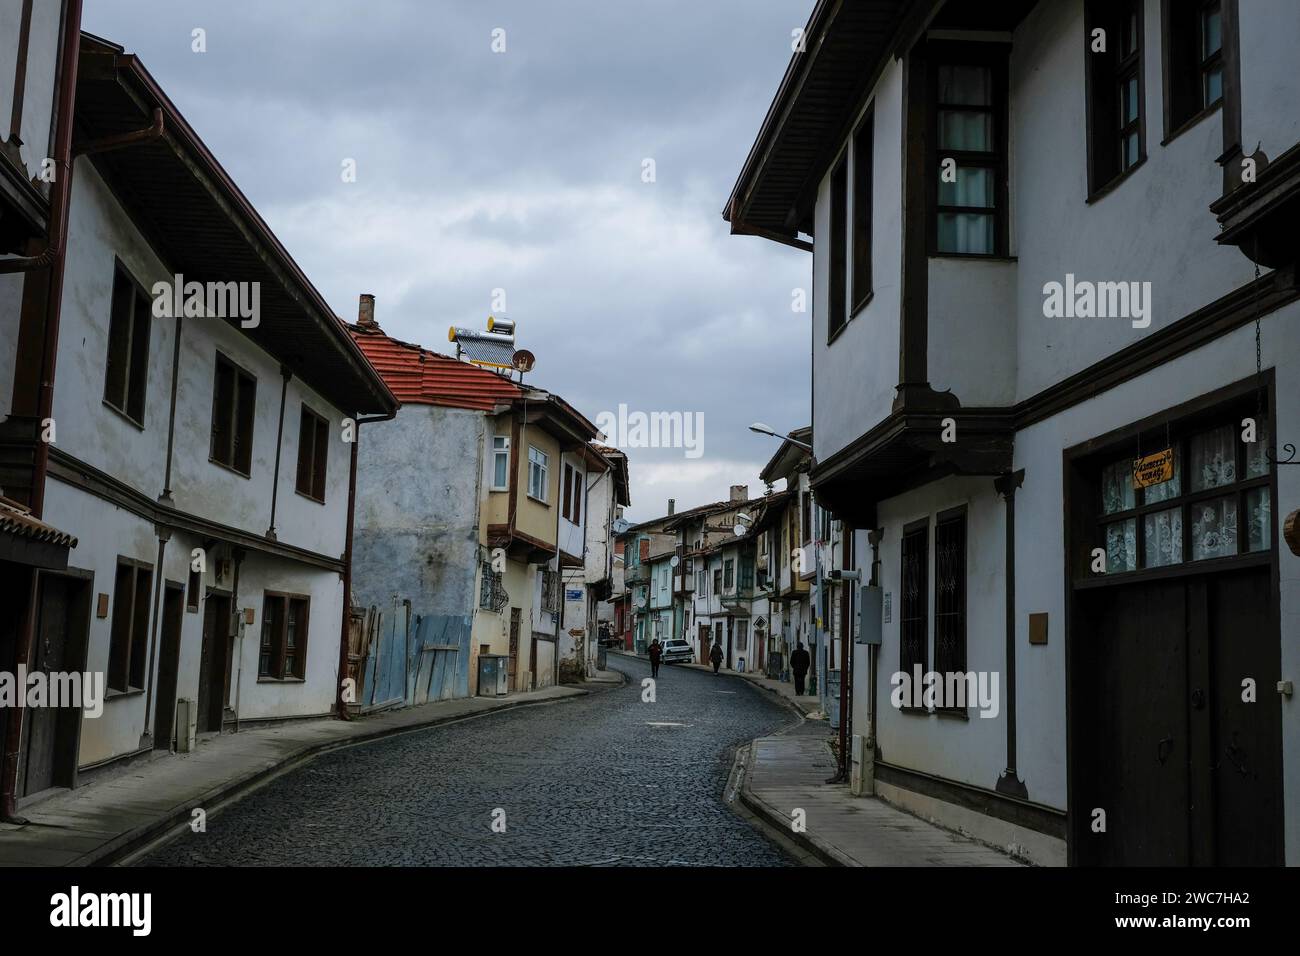 Zıle streets, full of hıstory. There are 3500 historical Turkish houses in the city center of Zile. Stock Photo